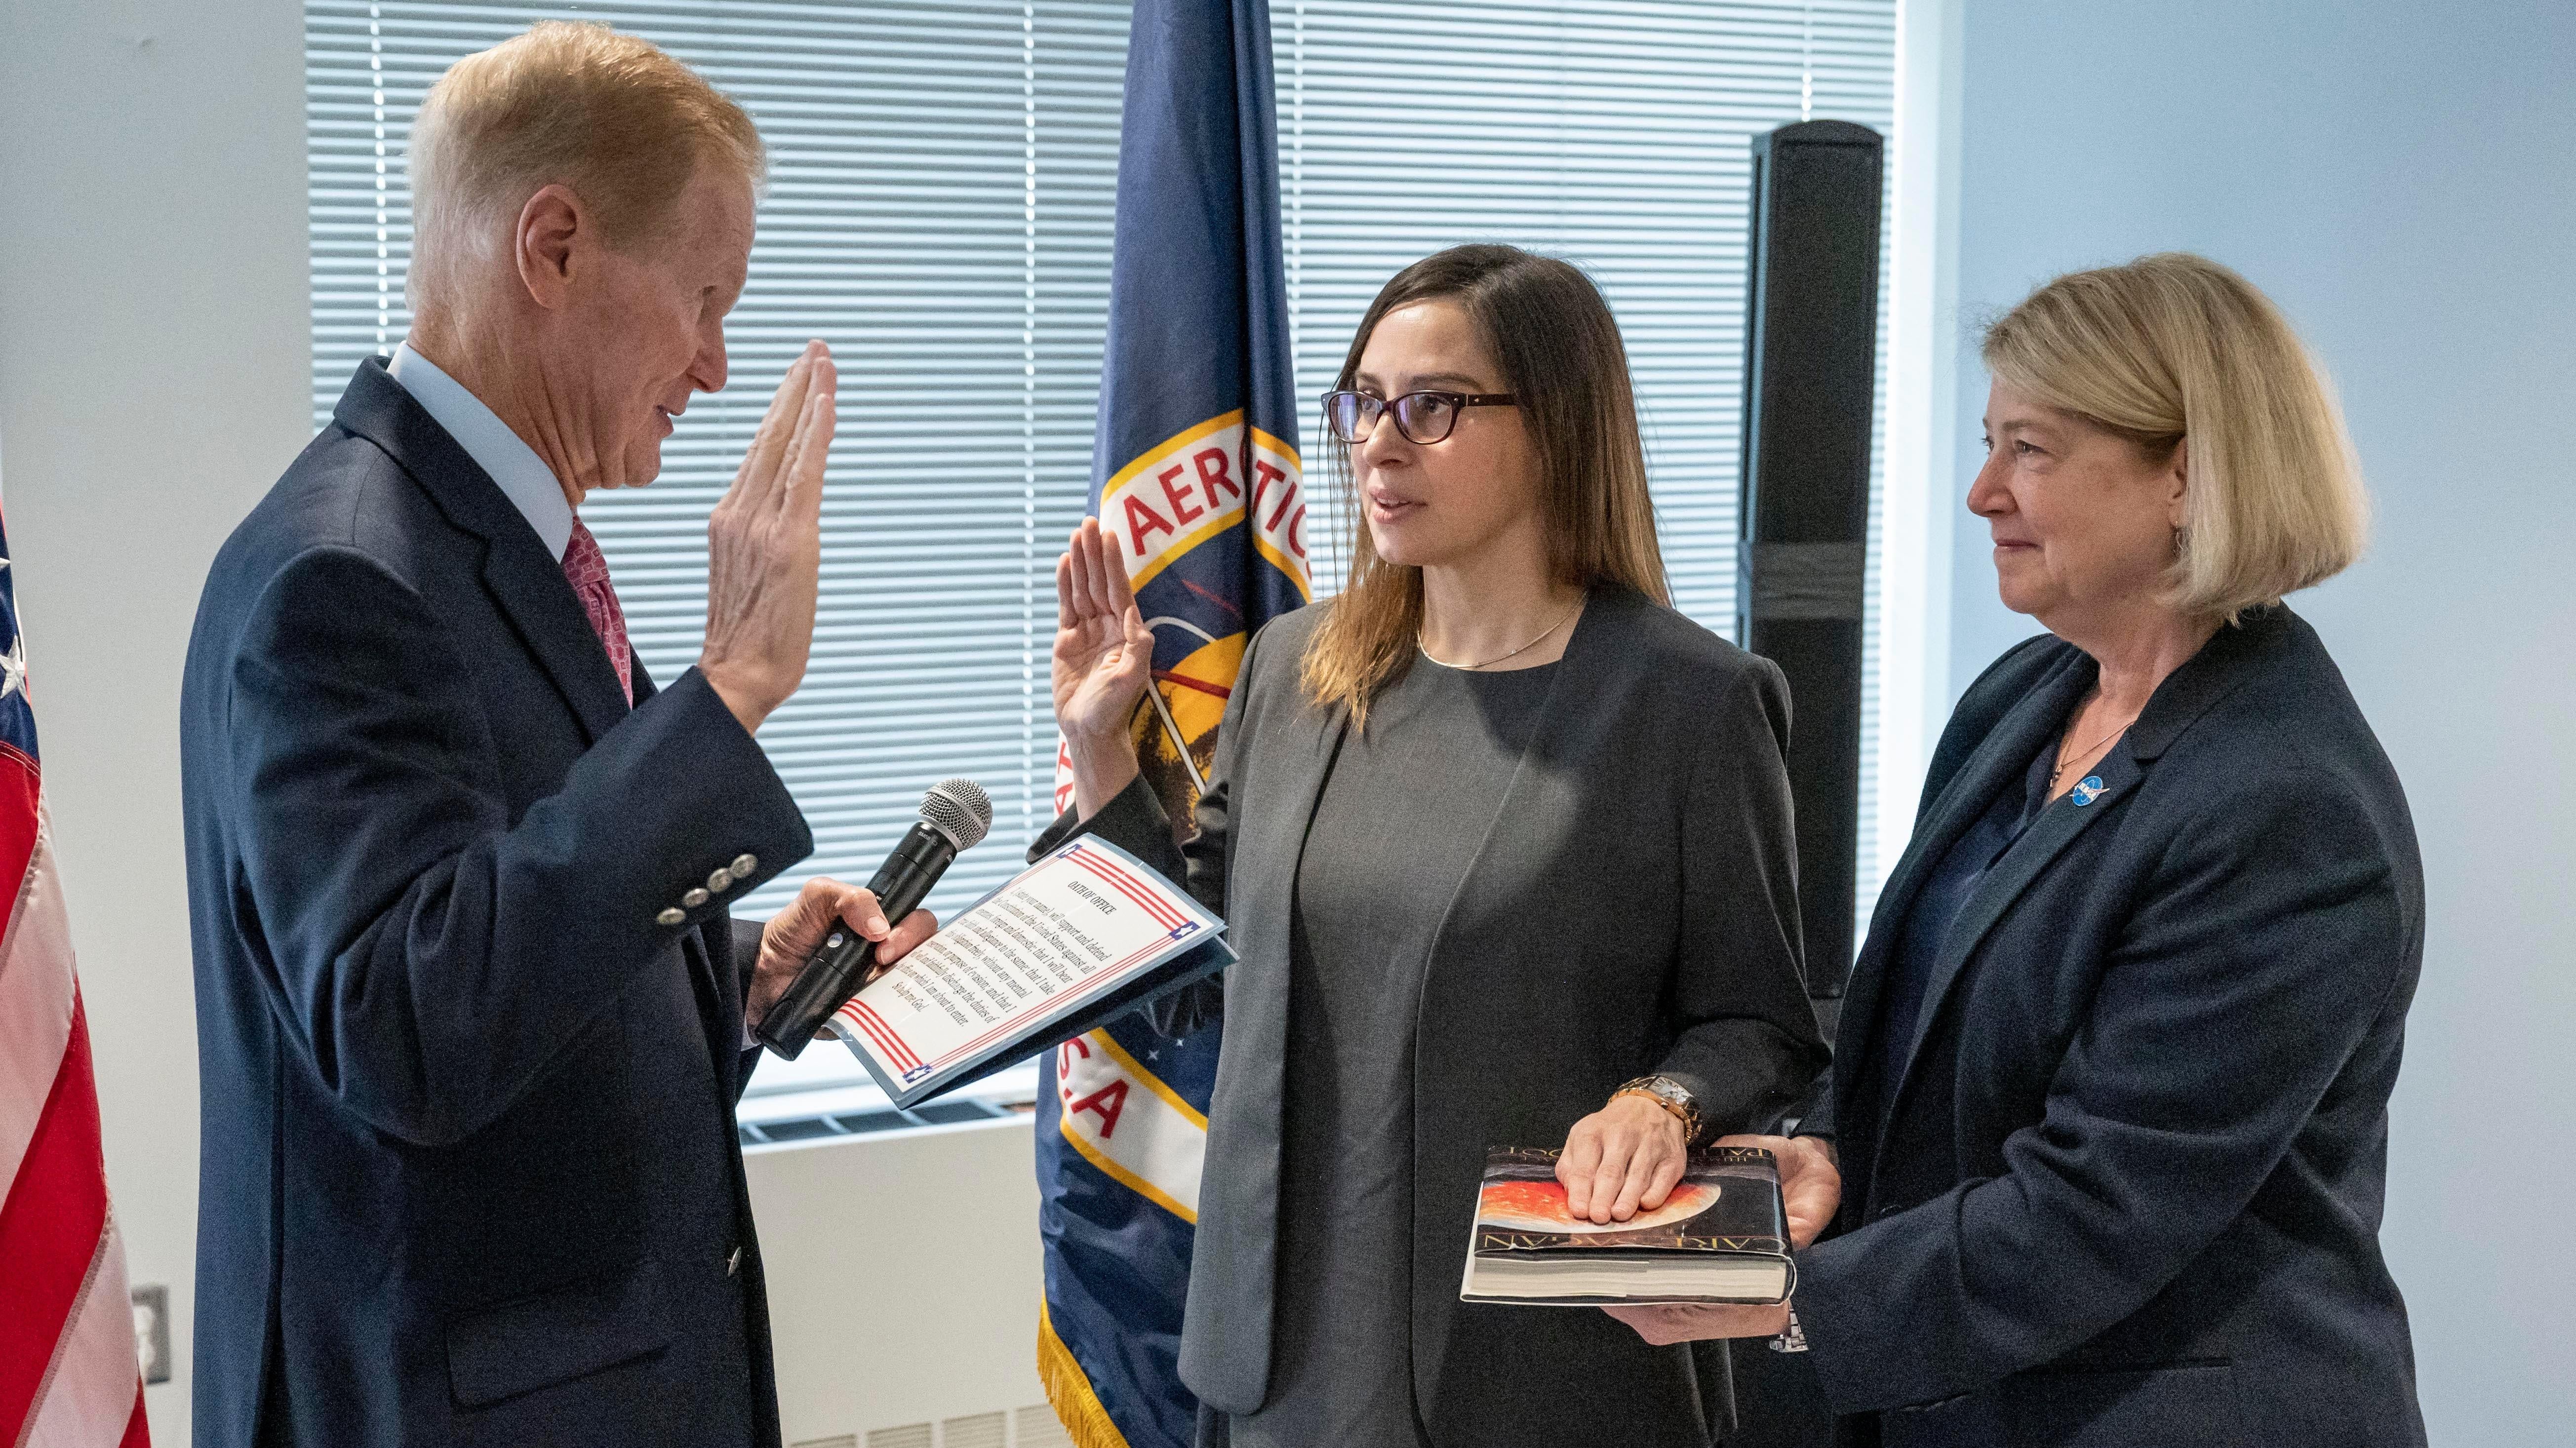 New NASA Official Took Her Oath of Office on Carl Sagan's 'Pale Blue Dot'